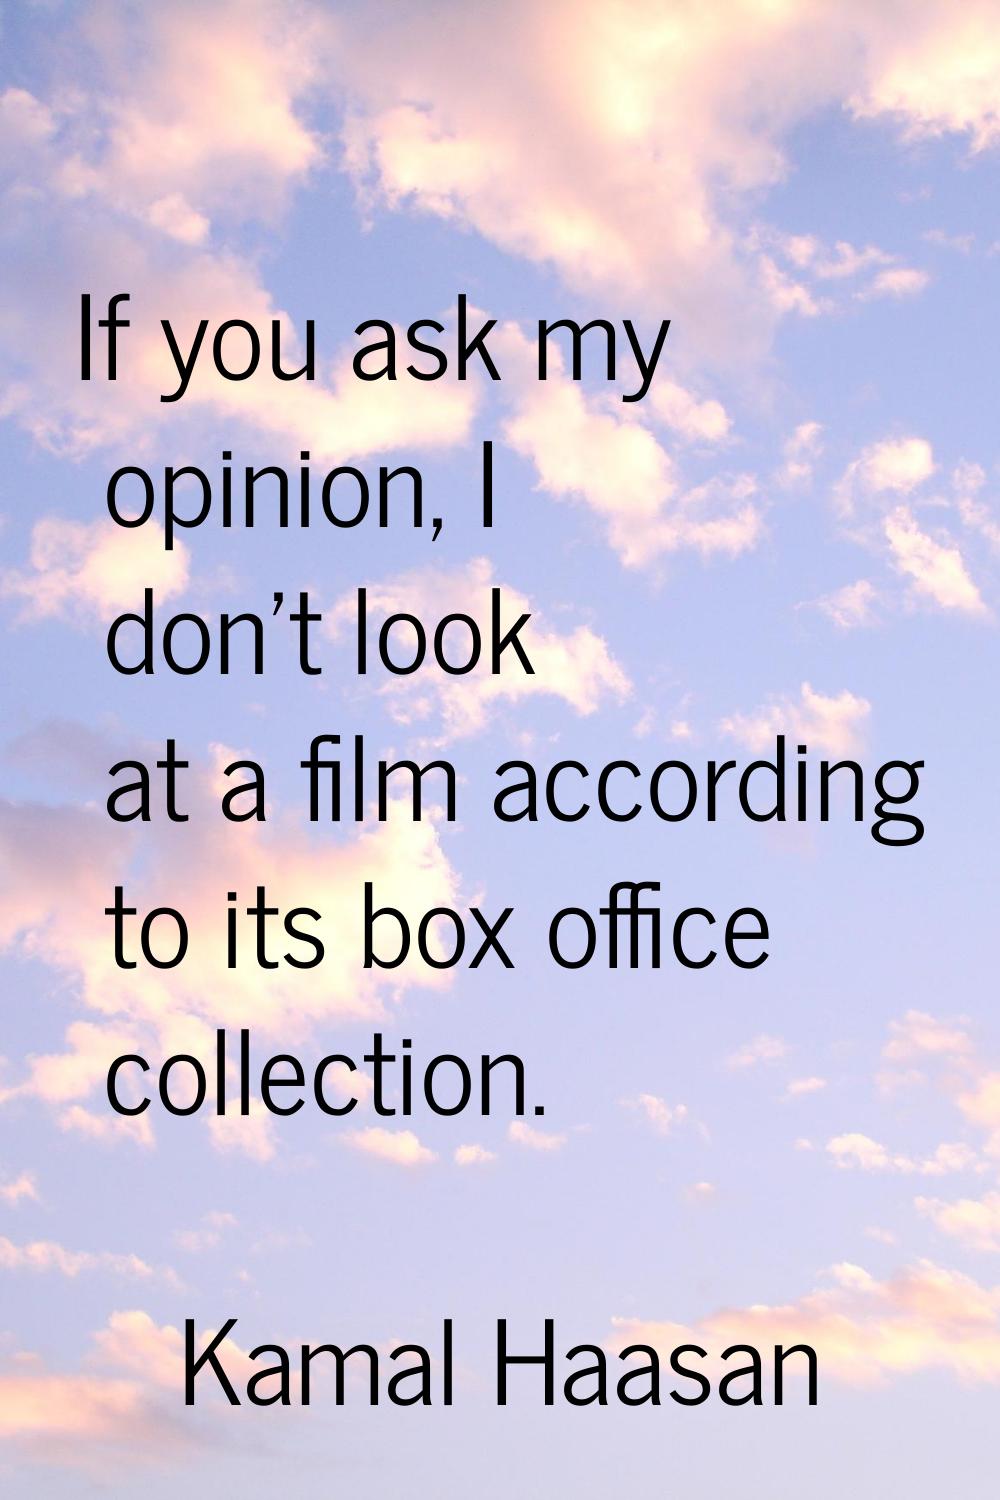 If you ask my opinion, I don't look at a film according to its box office collection.